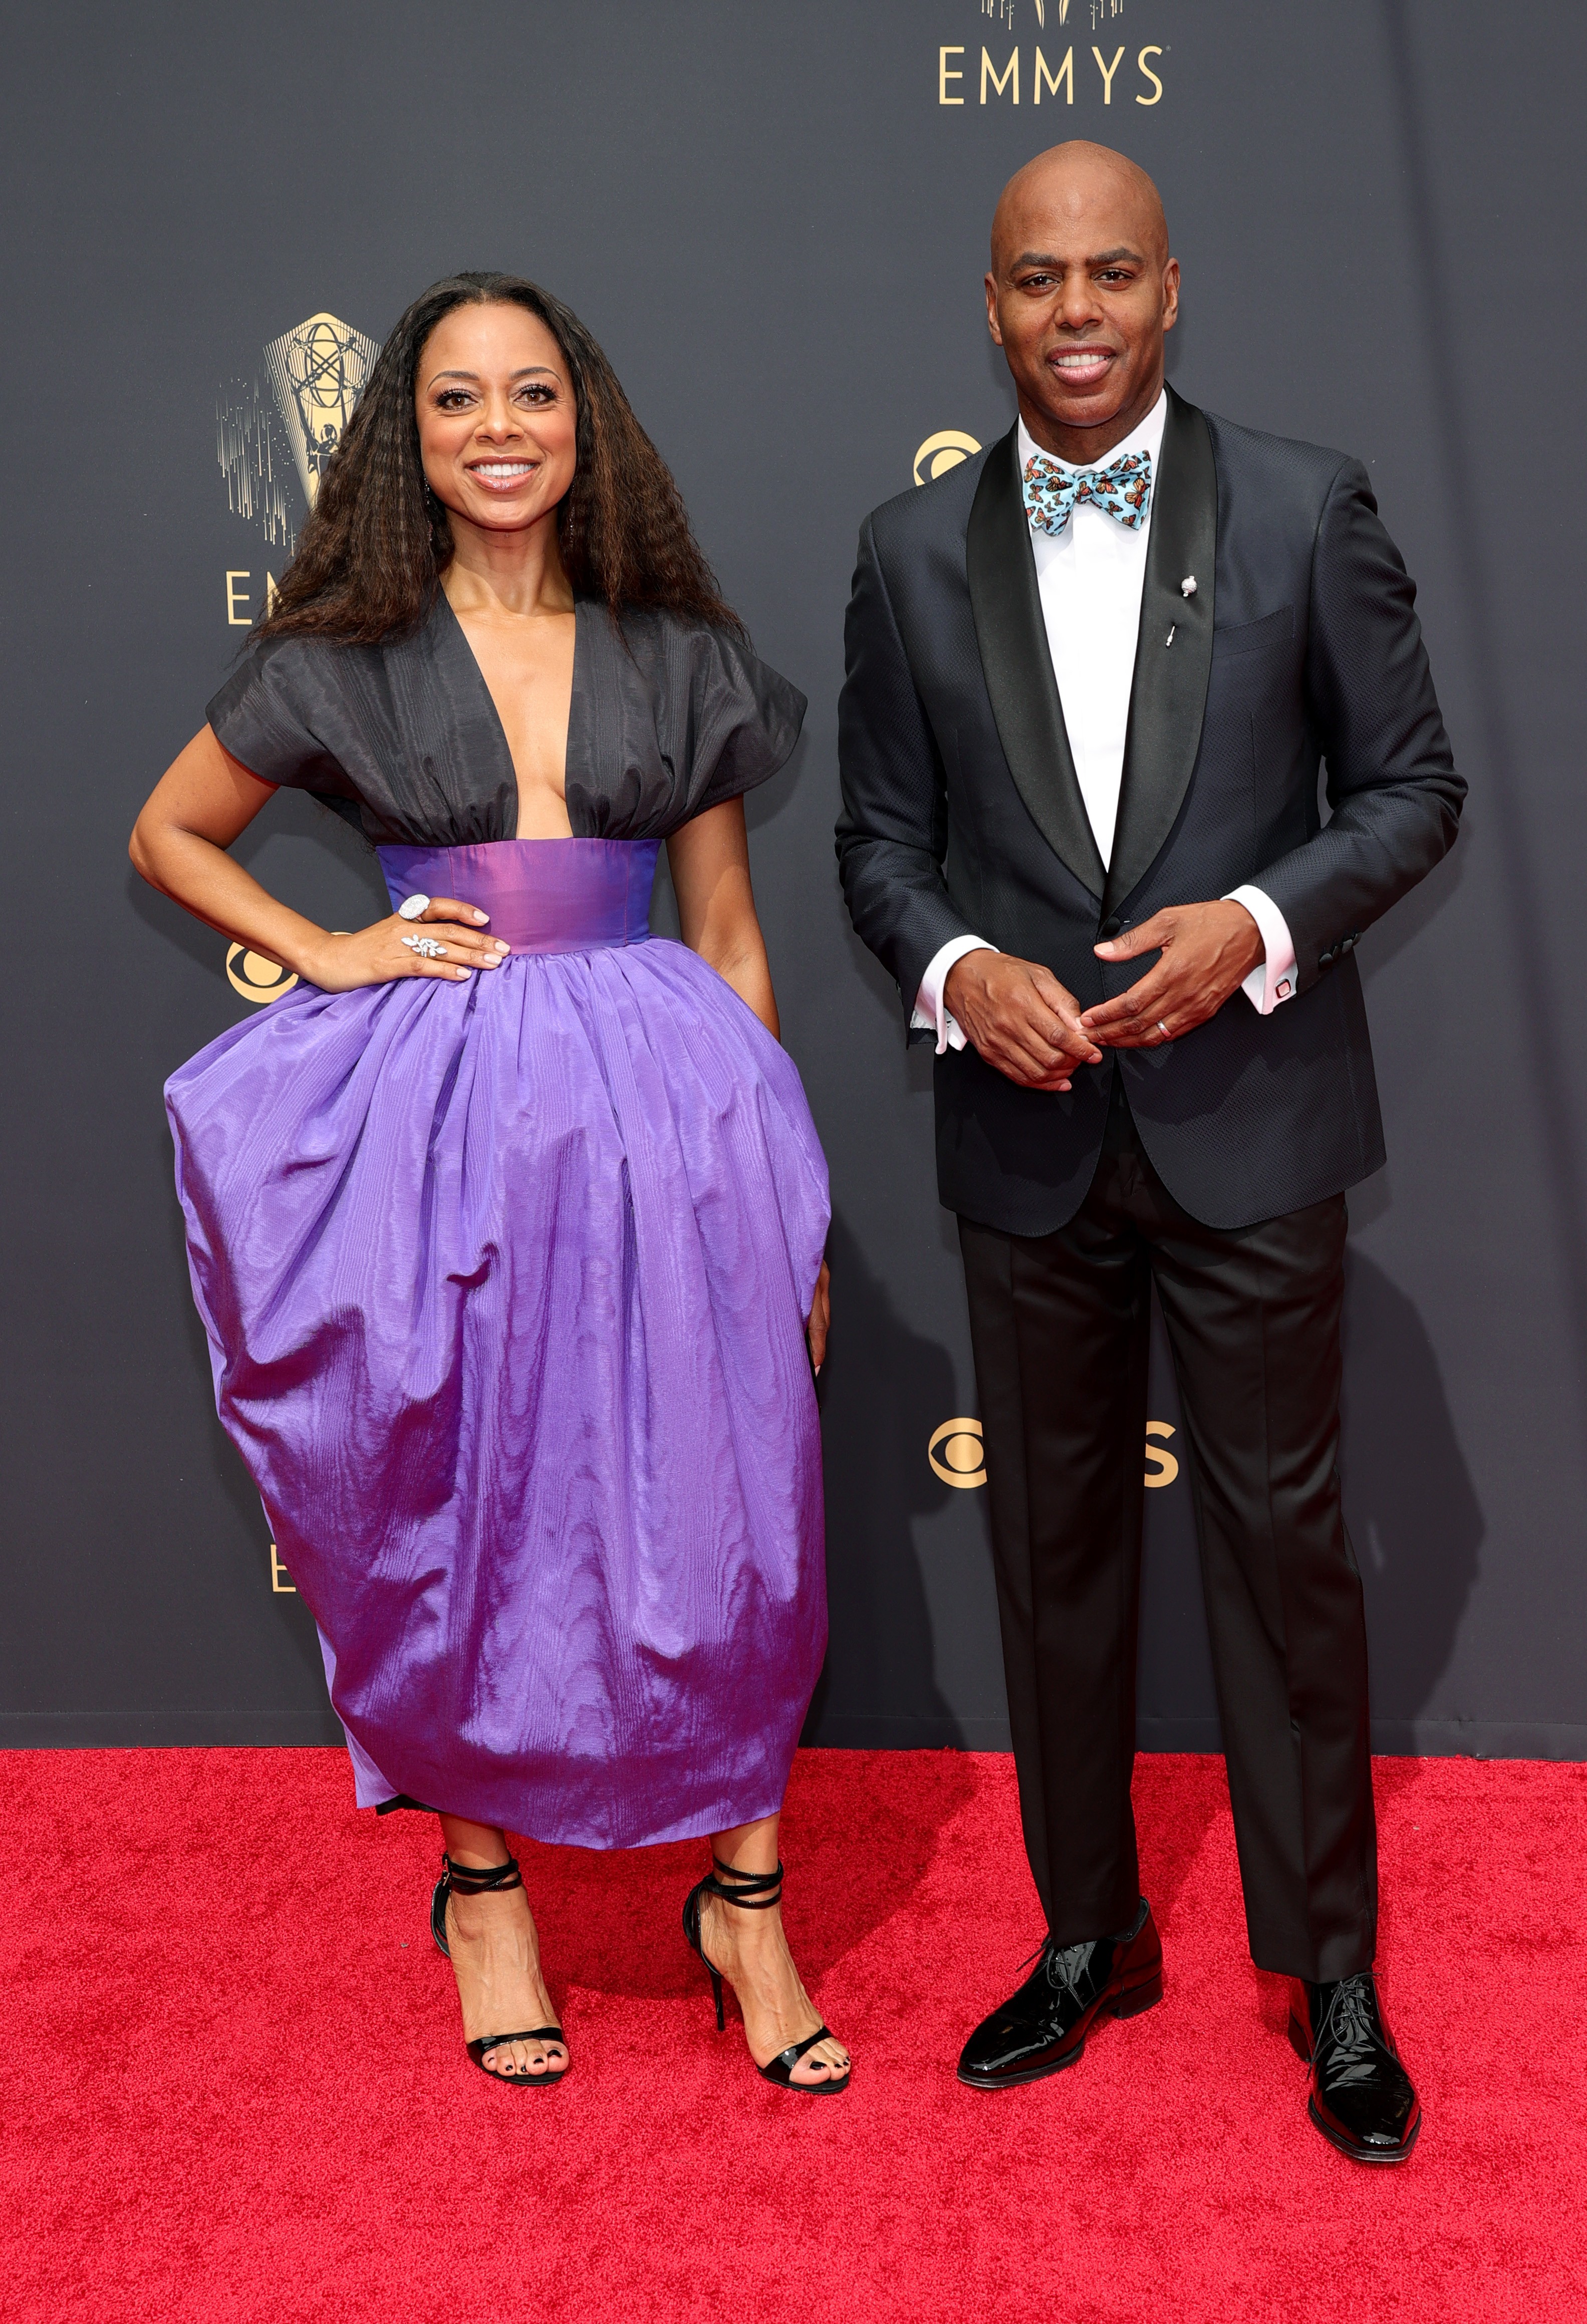 LOS ANGELES, CALIFORNIA - SEPTEMBER 19: (L-R) Nischelle Turner and Kevin Frazier attend the 73rd Primetime Emmy Awards at L.A. LIVE on September 19, 2021 in Los Angeles, California. (Photo by Rich Fury/Getty Images) (Foto: Getty Images)